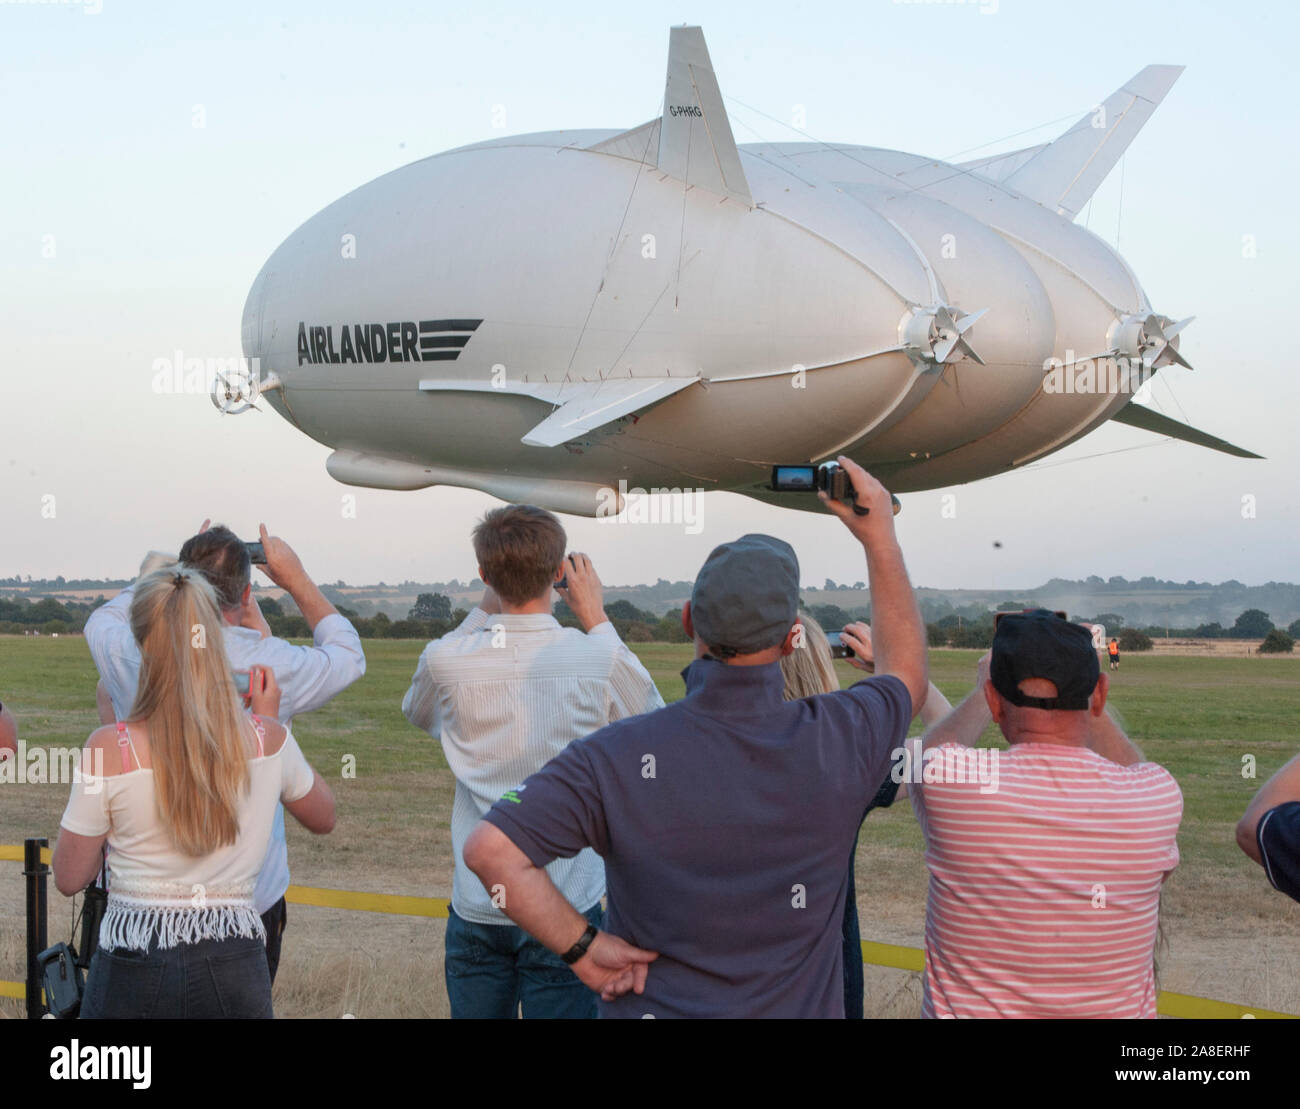 The Worlds largest Aircraft The Airlander 10 takes off on its maiden flight from an Airfield in Bedford, England. 17/08/2016 Stock Photo